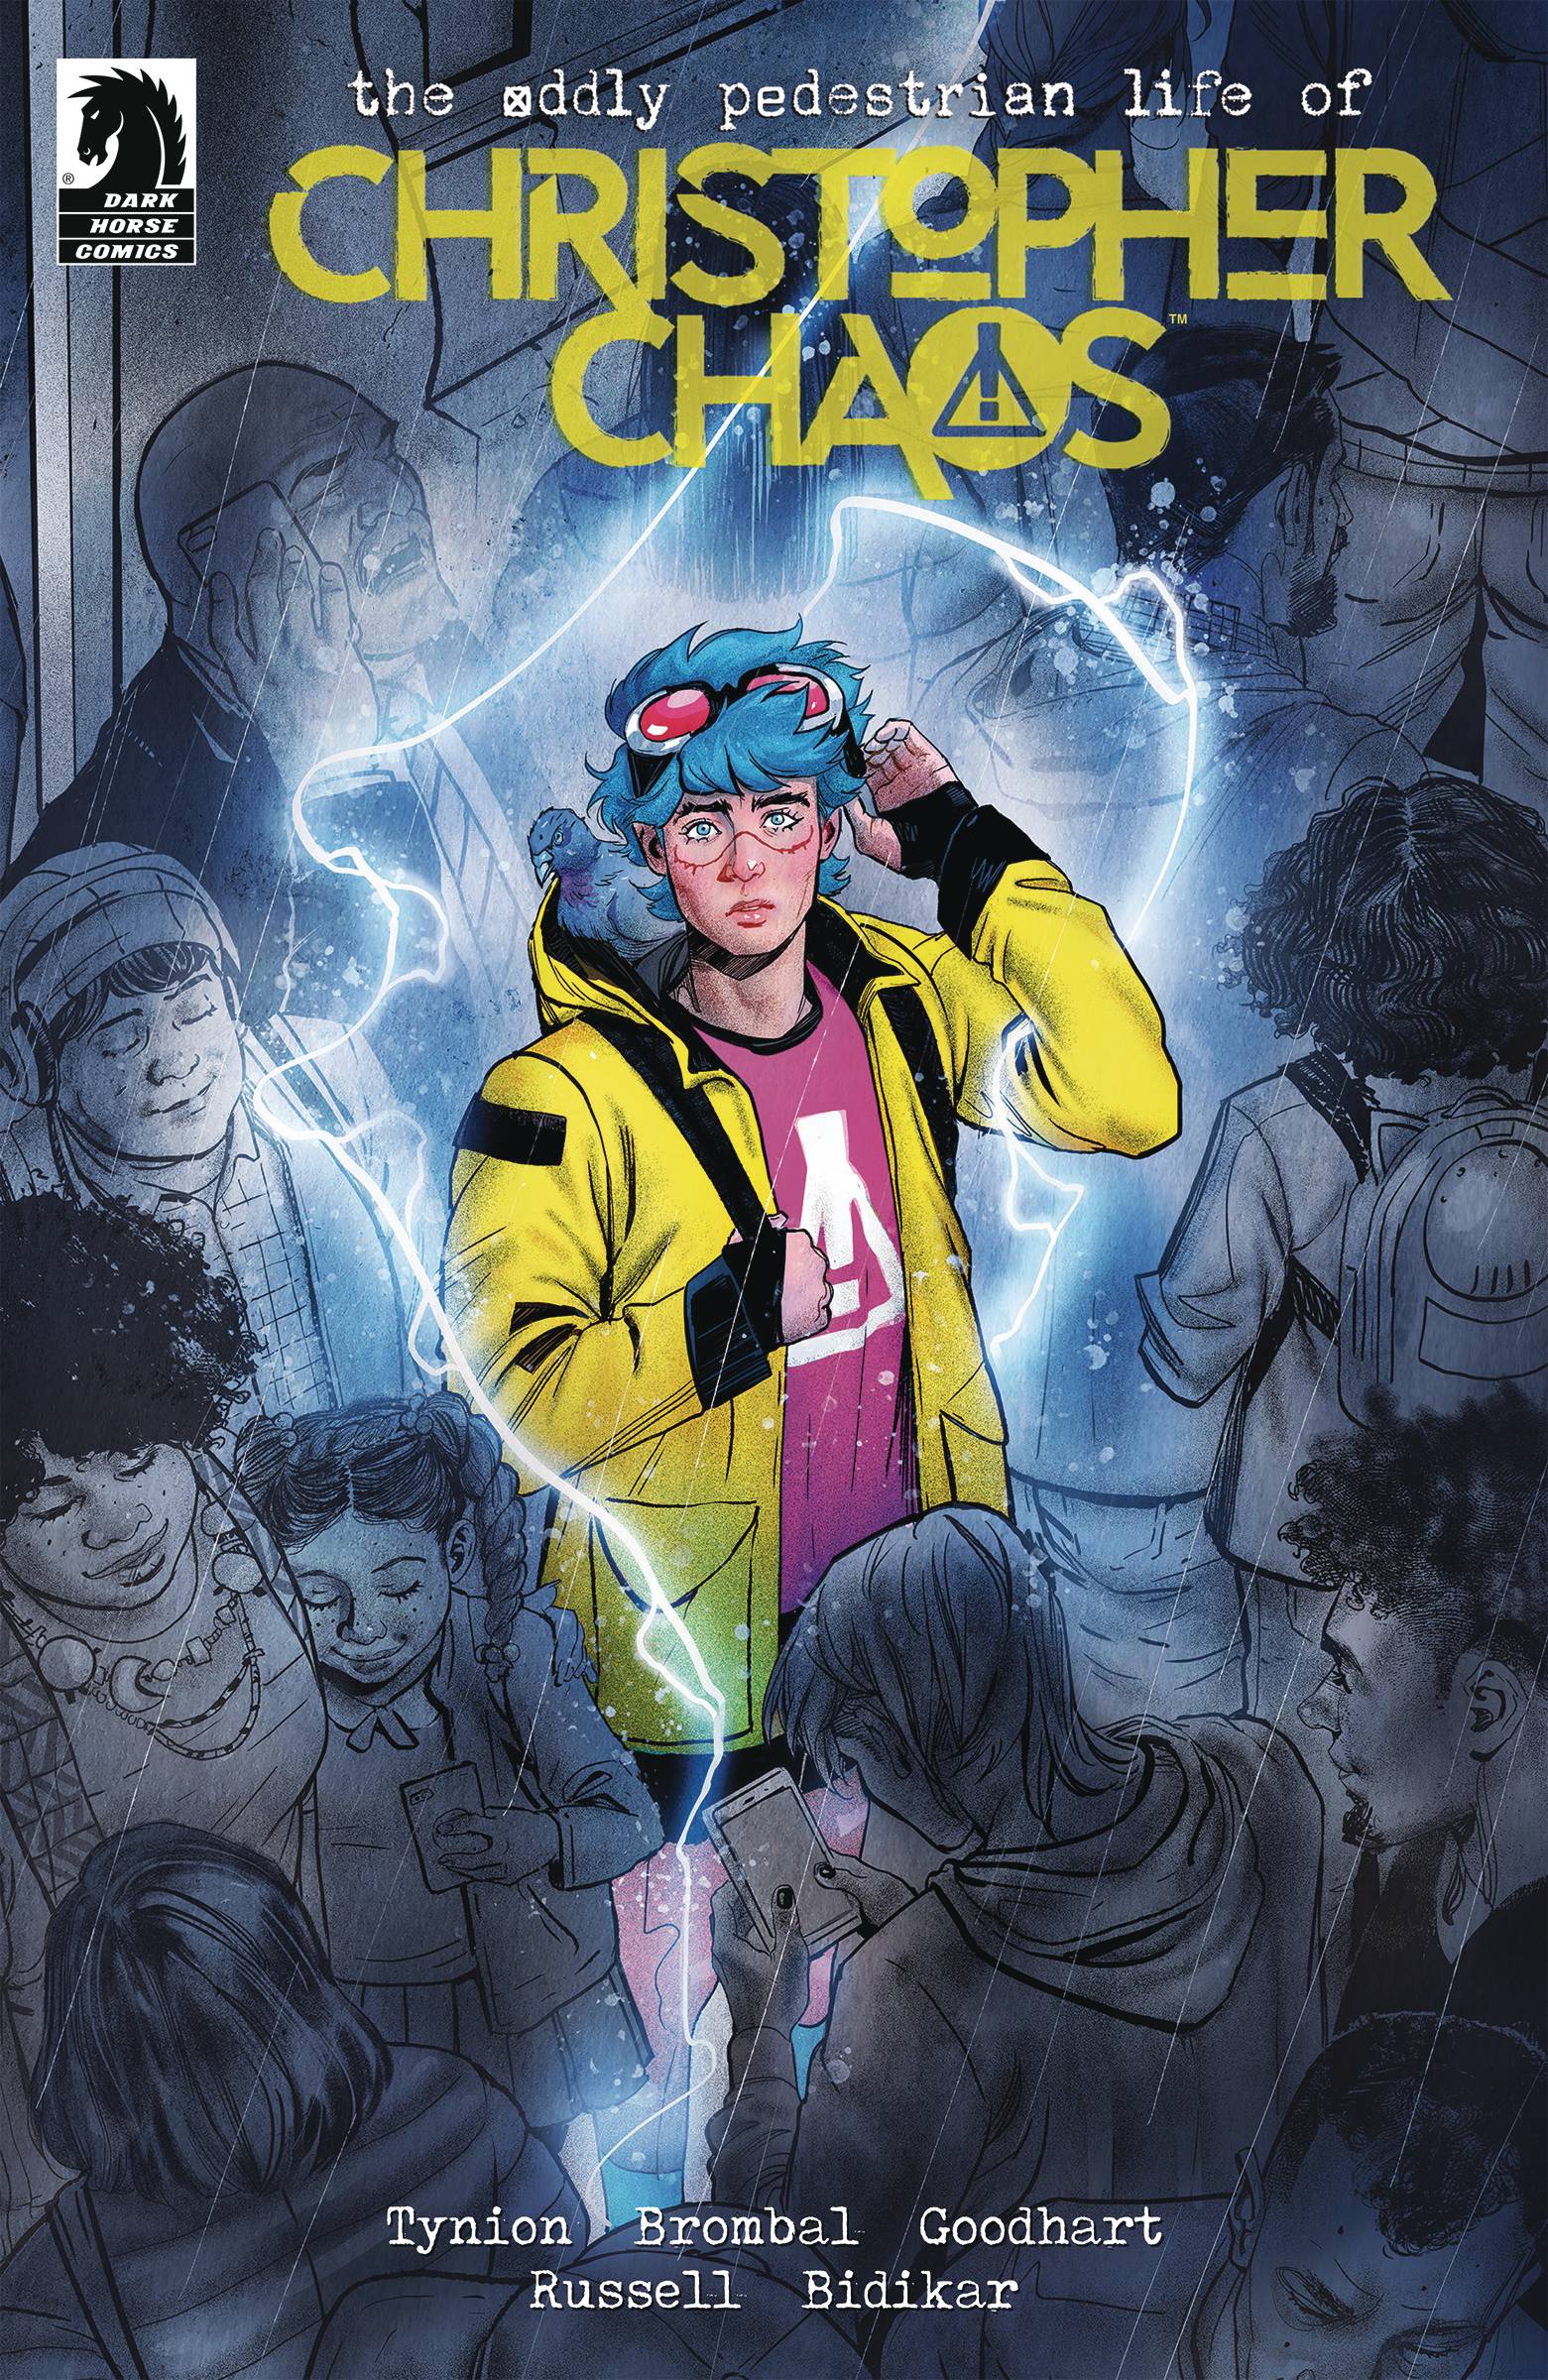 ODDLY PEDESTRIAN LIFE CHRISTOPHER CHAOS #1 CVR A ROBLES [SIGNED BY JAMES TYNION IV, TATE BROMBAL, ISAAC GOODHART & NICK ROBLES]